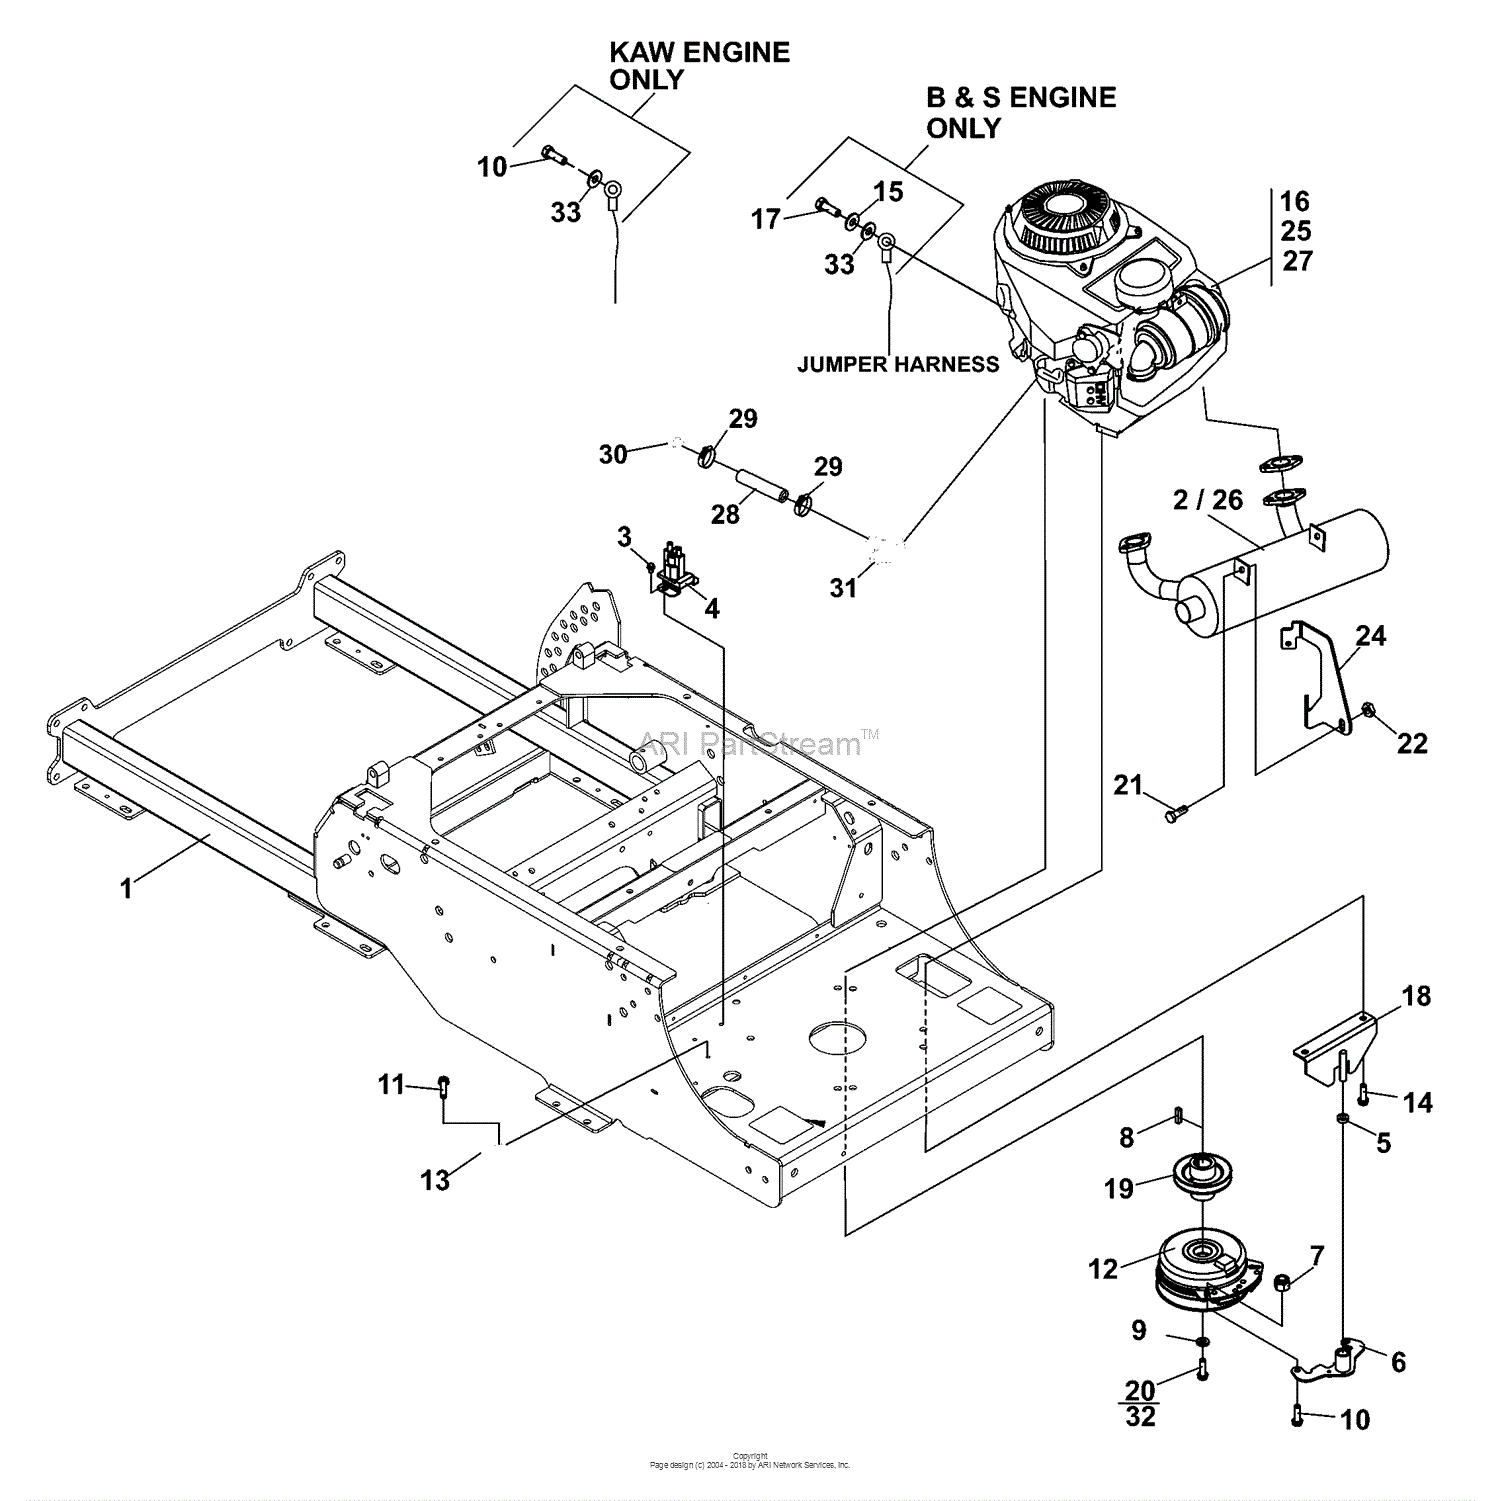 Engine And Clutch Contact Diagram